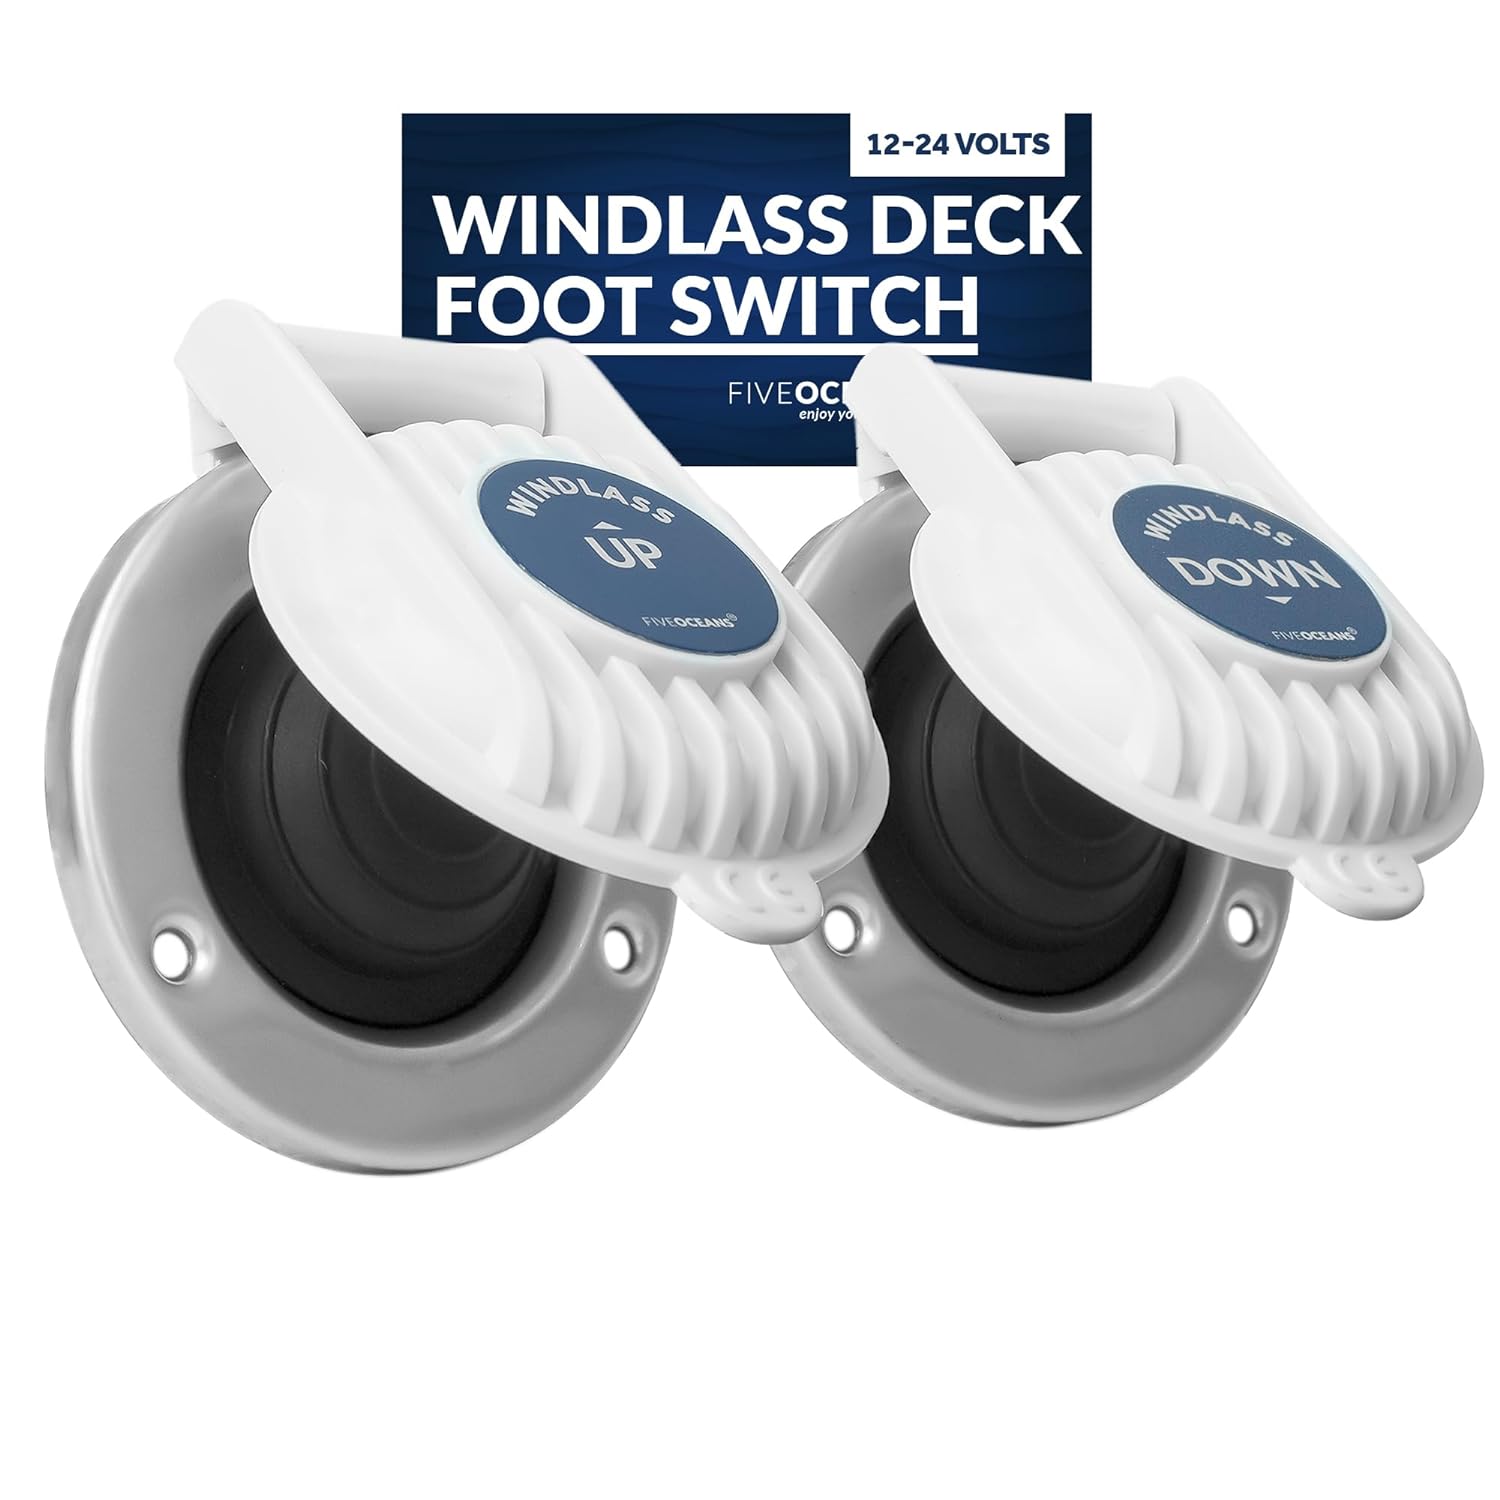 Windlass Deck Foot Switch, Up/Down Single Direction Switches - Five Oceans-1